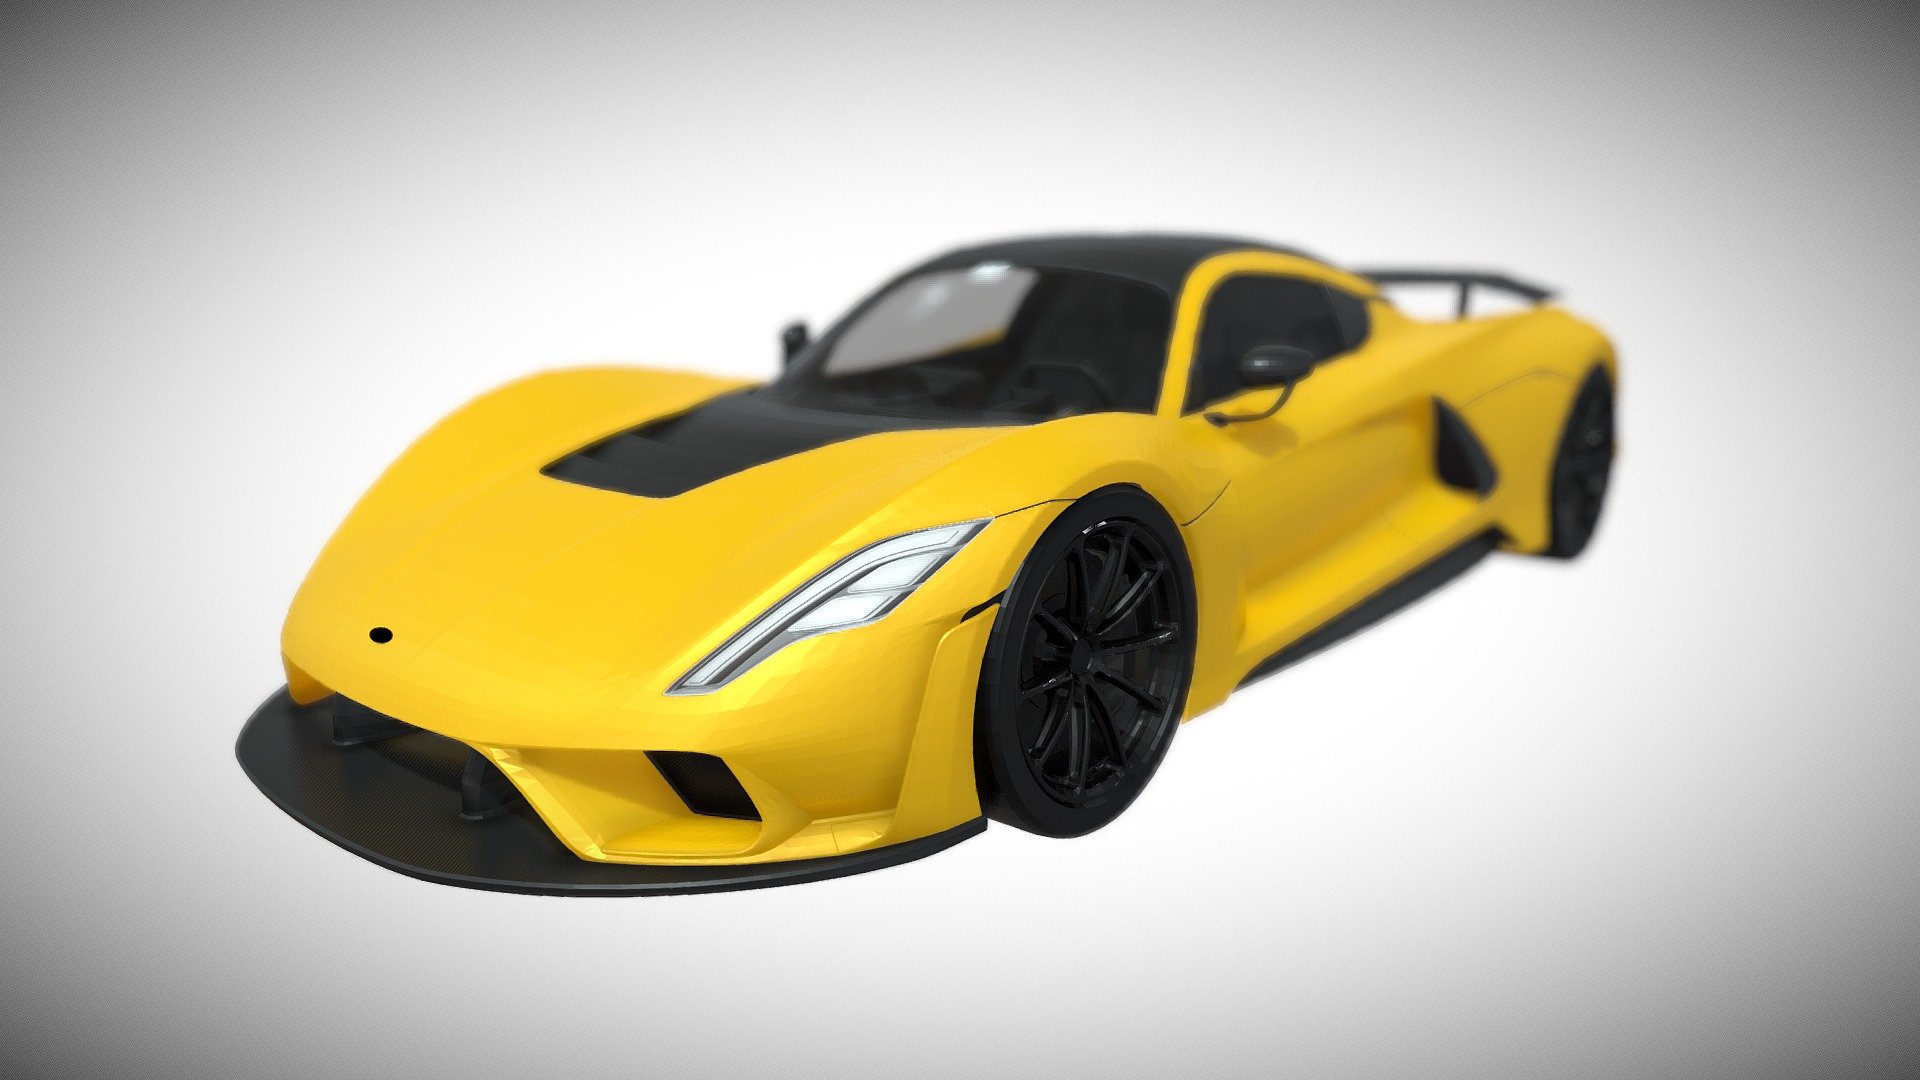 I am not giving this for free.

Detailed interior.

Liscence plate pieces available.

Other Hennessey Venom F5: https://sketchfab.com/3d-models/hennesey-venom-f5-dbbf5ff7eb104519831ce506dabc4e5c 

Have a nice holiday! - Hennessey Venom F5-$10 - 3D model by Chaserfan 3d model